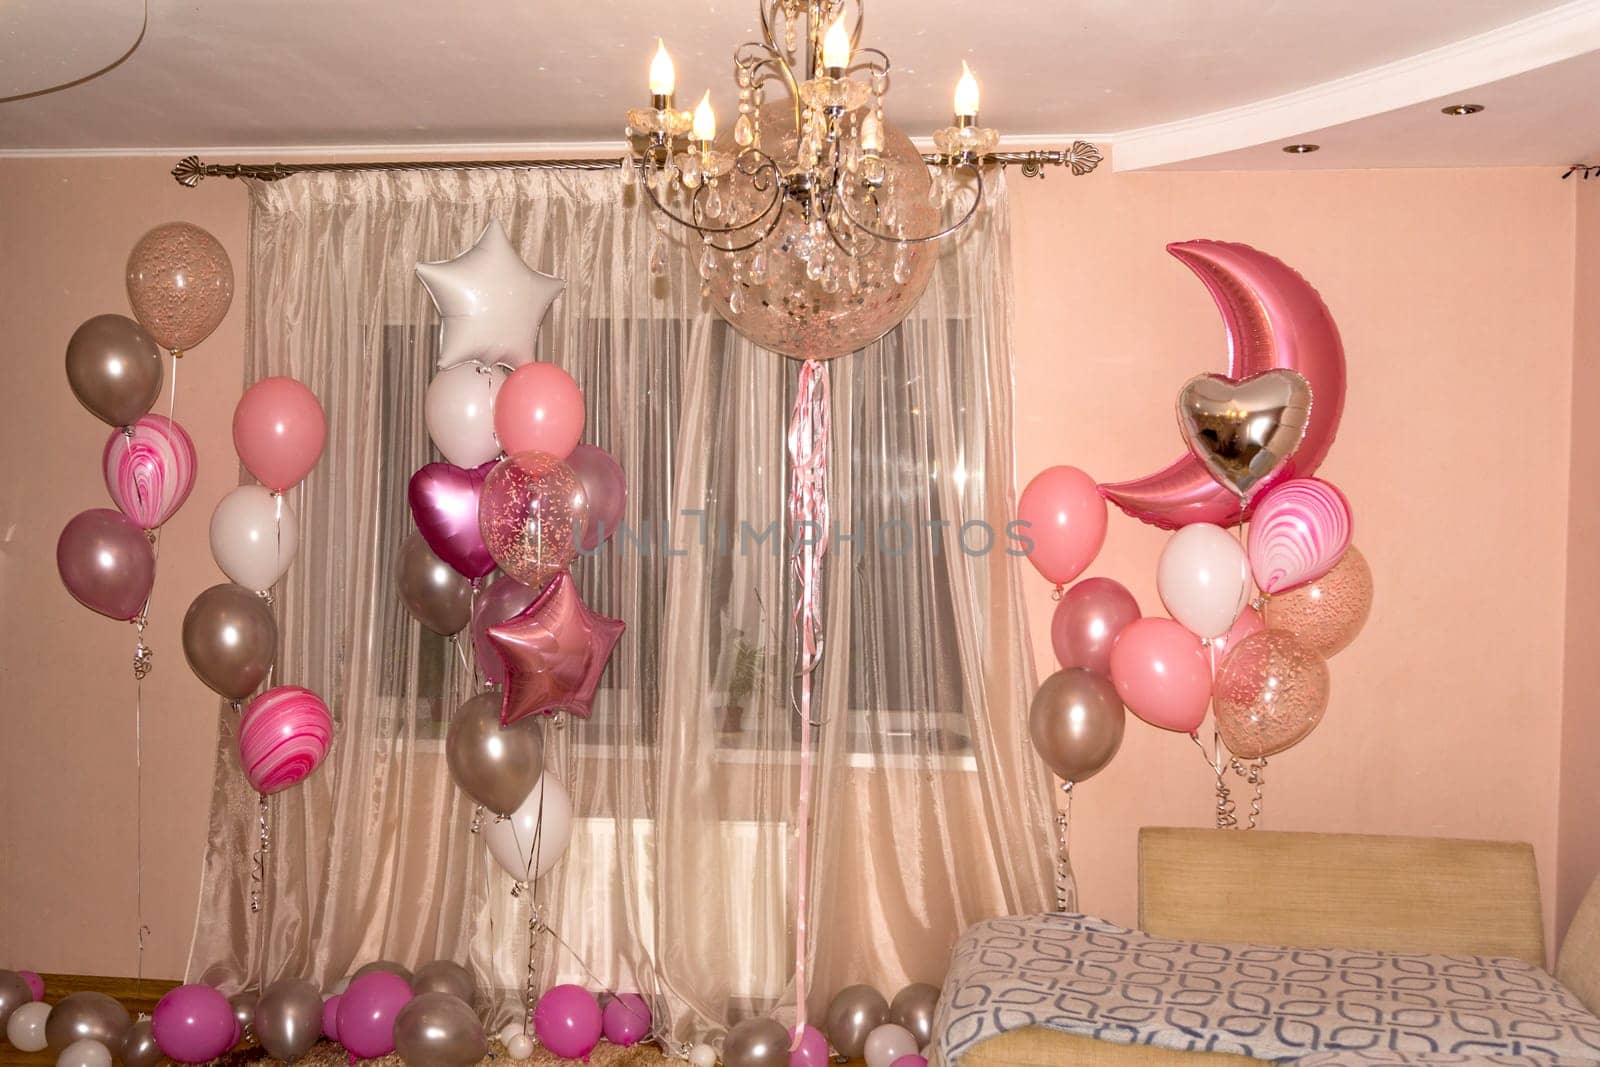 The room is decorated with various balloons.